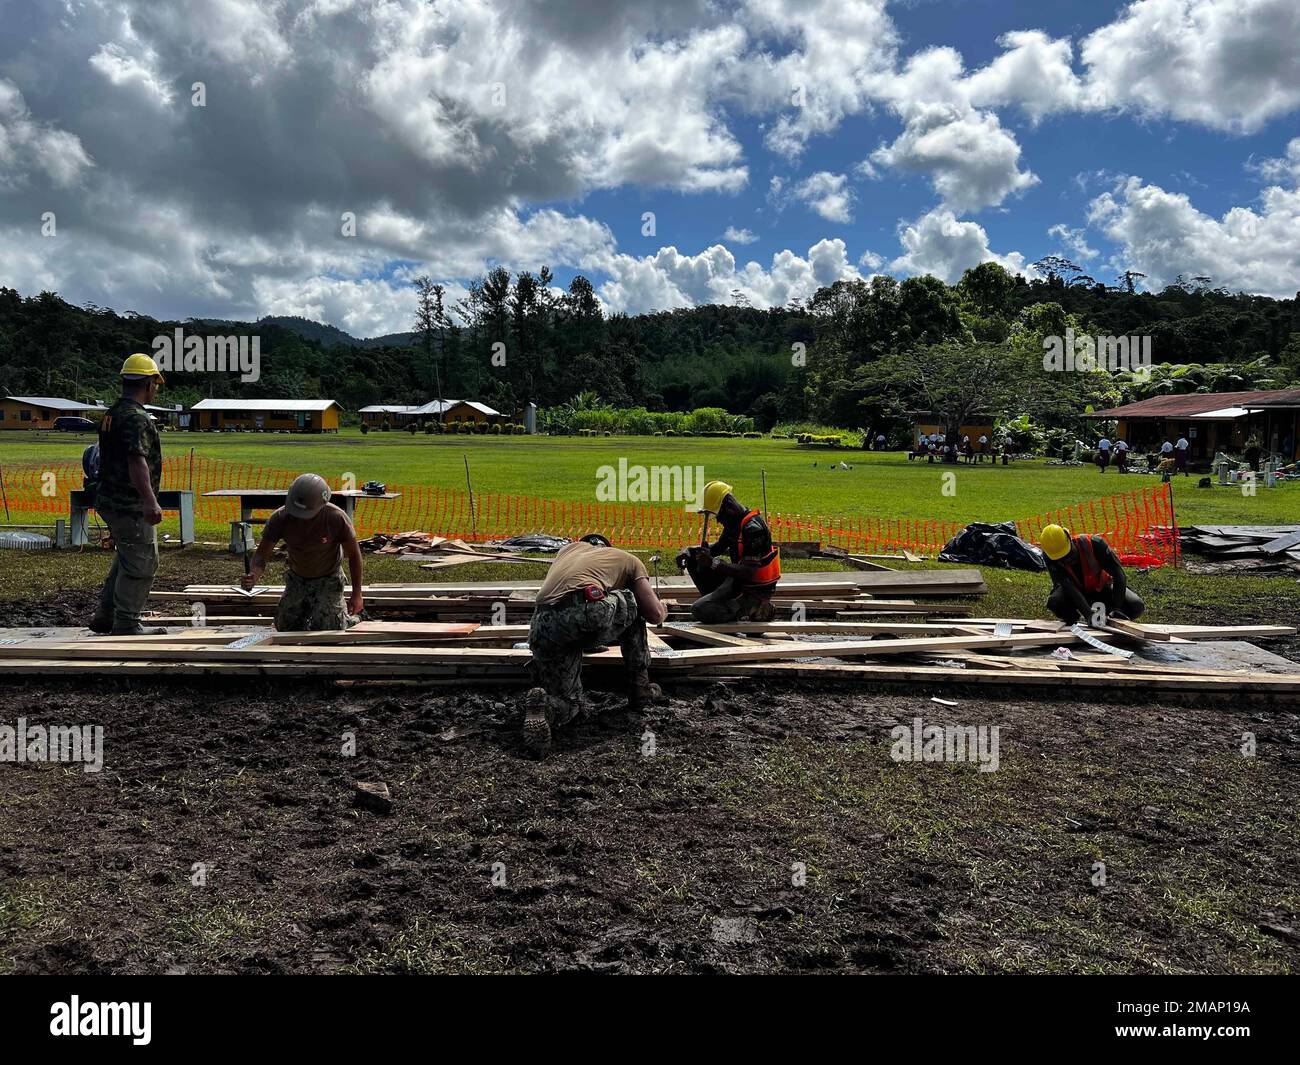 SAVUSAVU, Republic of Fiji (June 14, 2022) — U.S. Navy Seabees assigned to Naval Mobile Construction Battalion 3 NMCB-3), alongside the Republic of Fiji Military Forces, construct roof trusses in support of a Pacific Partnership 2022 engineering project in Savusavu, Fiji. Now in its 17th year, Pacific Partnership is the largest annual multinational humanitarian assistance and disaster relief preparedness mission conducted in the Indo-Pacific. Stock Photo